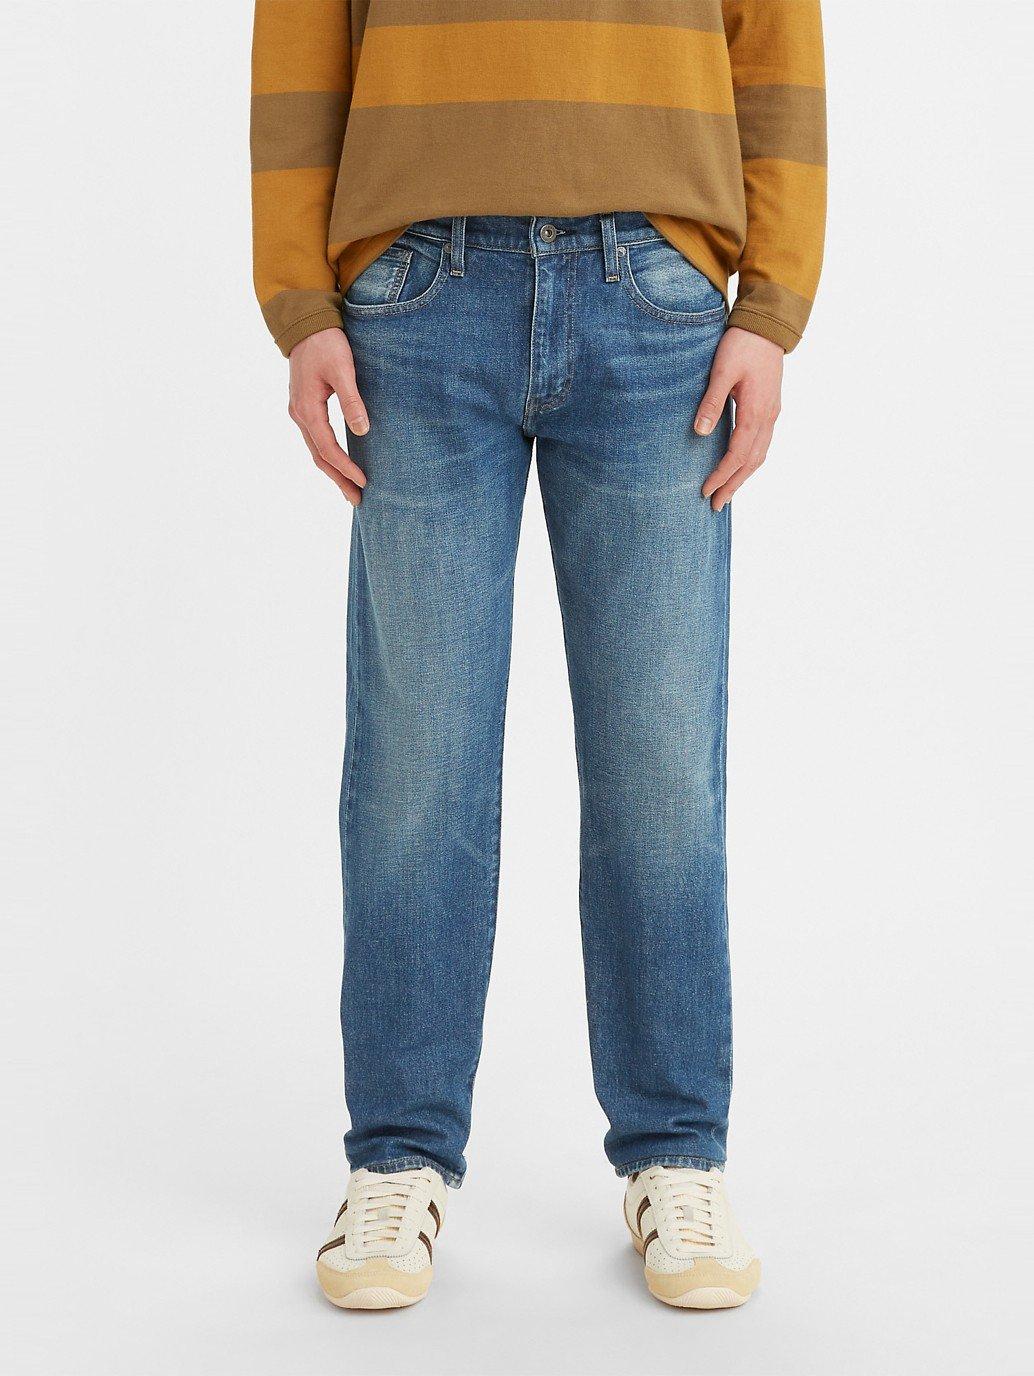 Buy Levi's® Made & Crafted® Men's 502™ Taper Jeans | Levi’s® Official ...